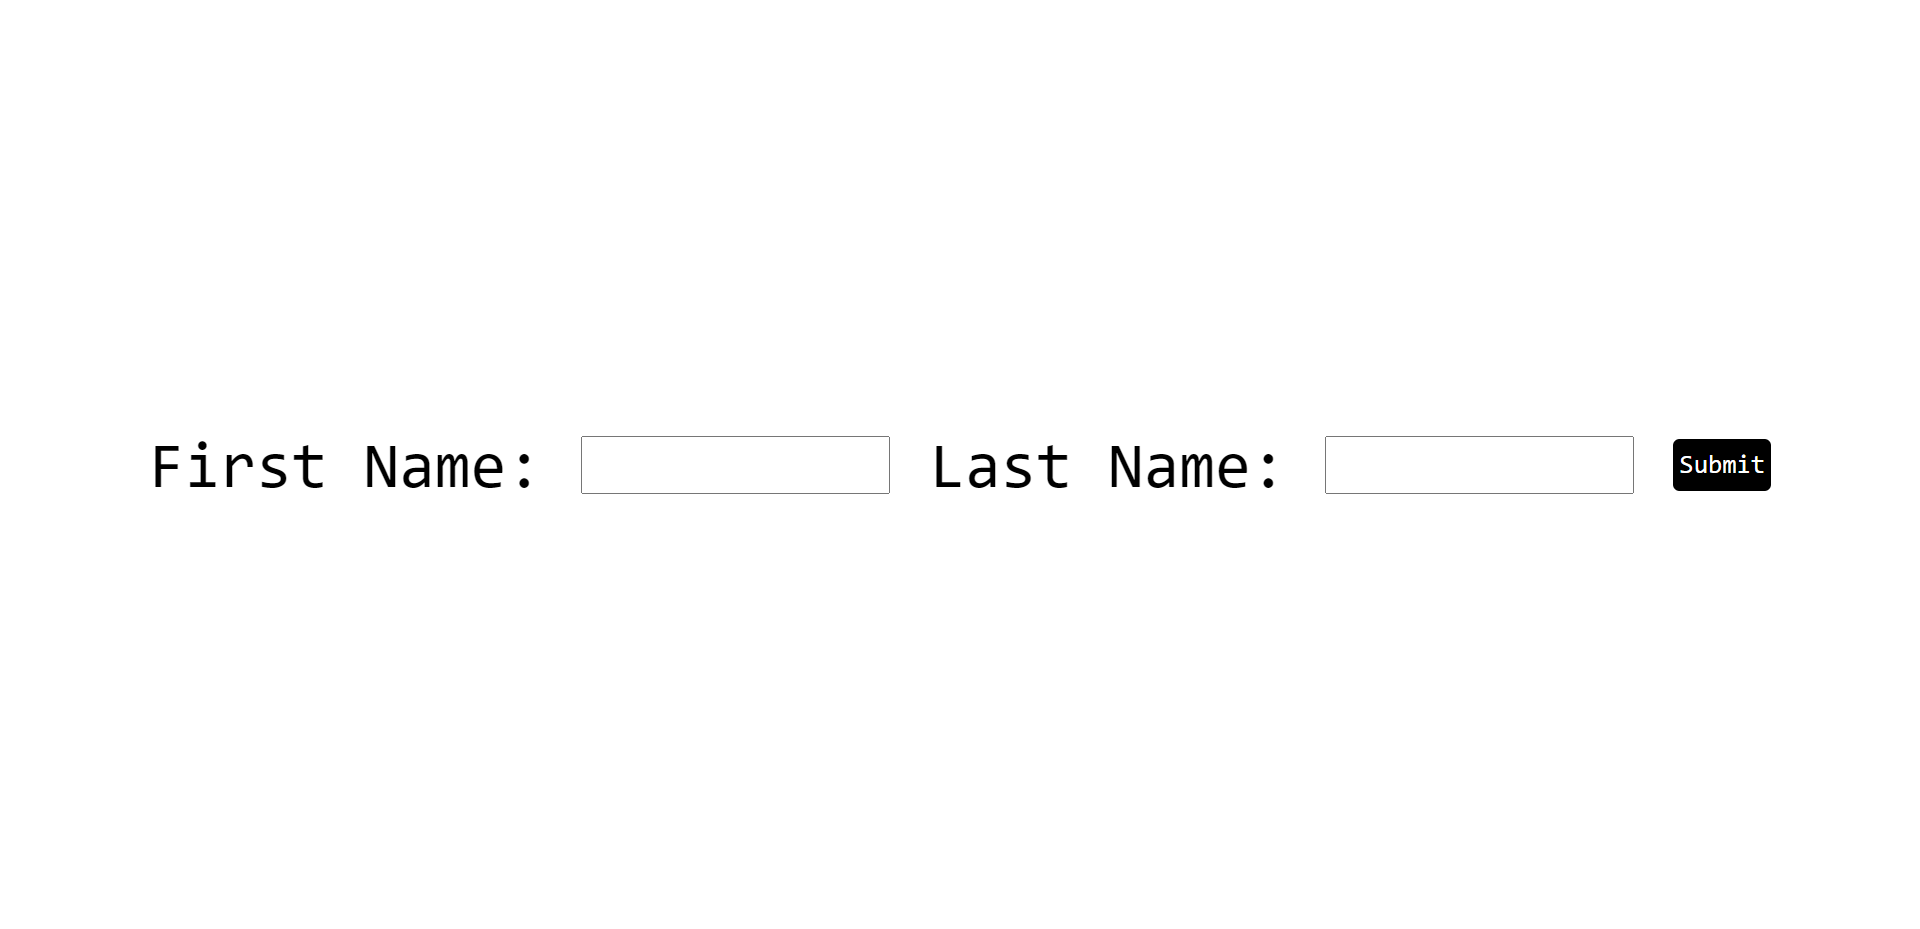 A screenshot of the web-app, contains a form with two inputs asking for first and last name, and submit button. Below the form there is a paragraph saying "Hello Henry Bao!"